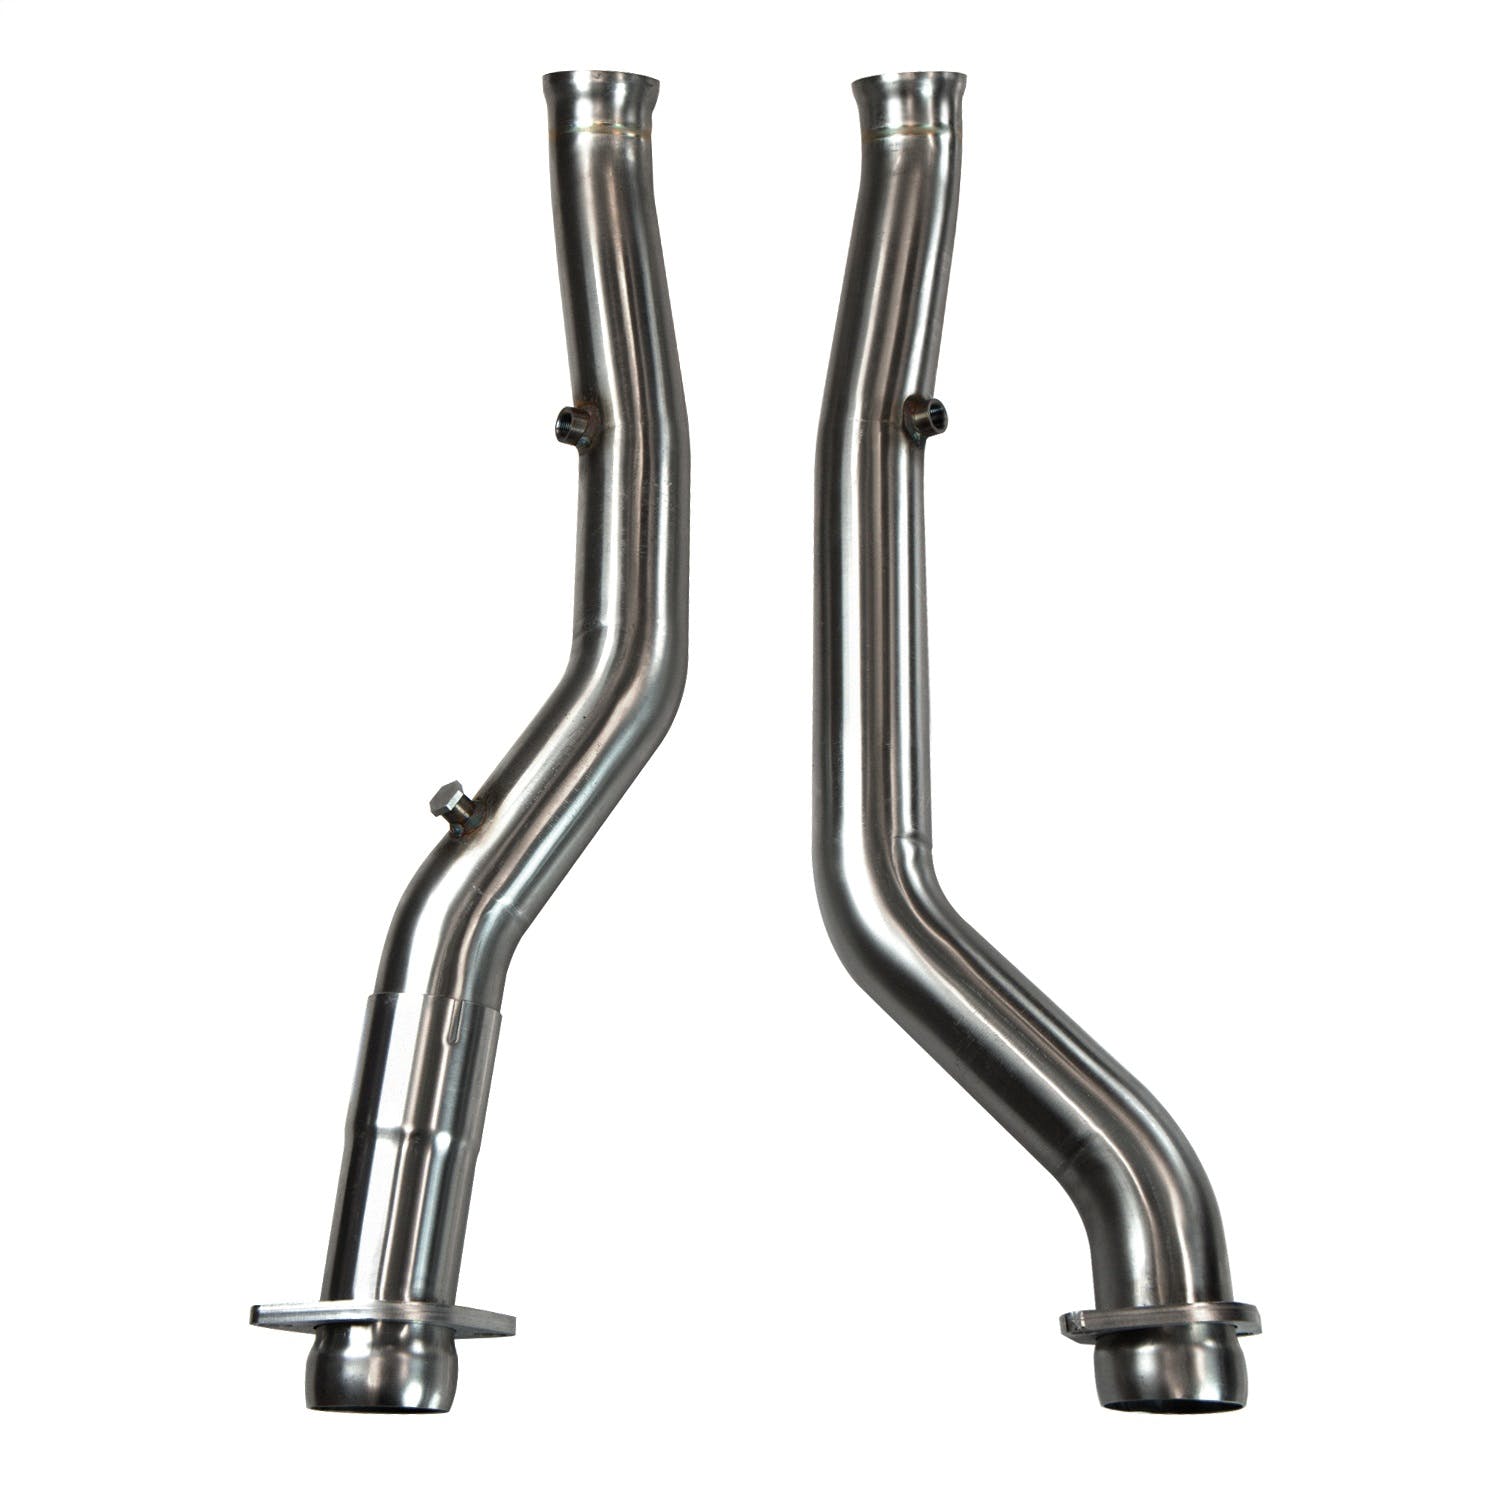 Kooks Custom Headers 34103101 Off Road Connection Pipes